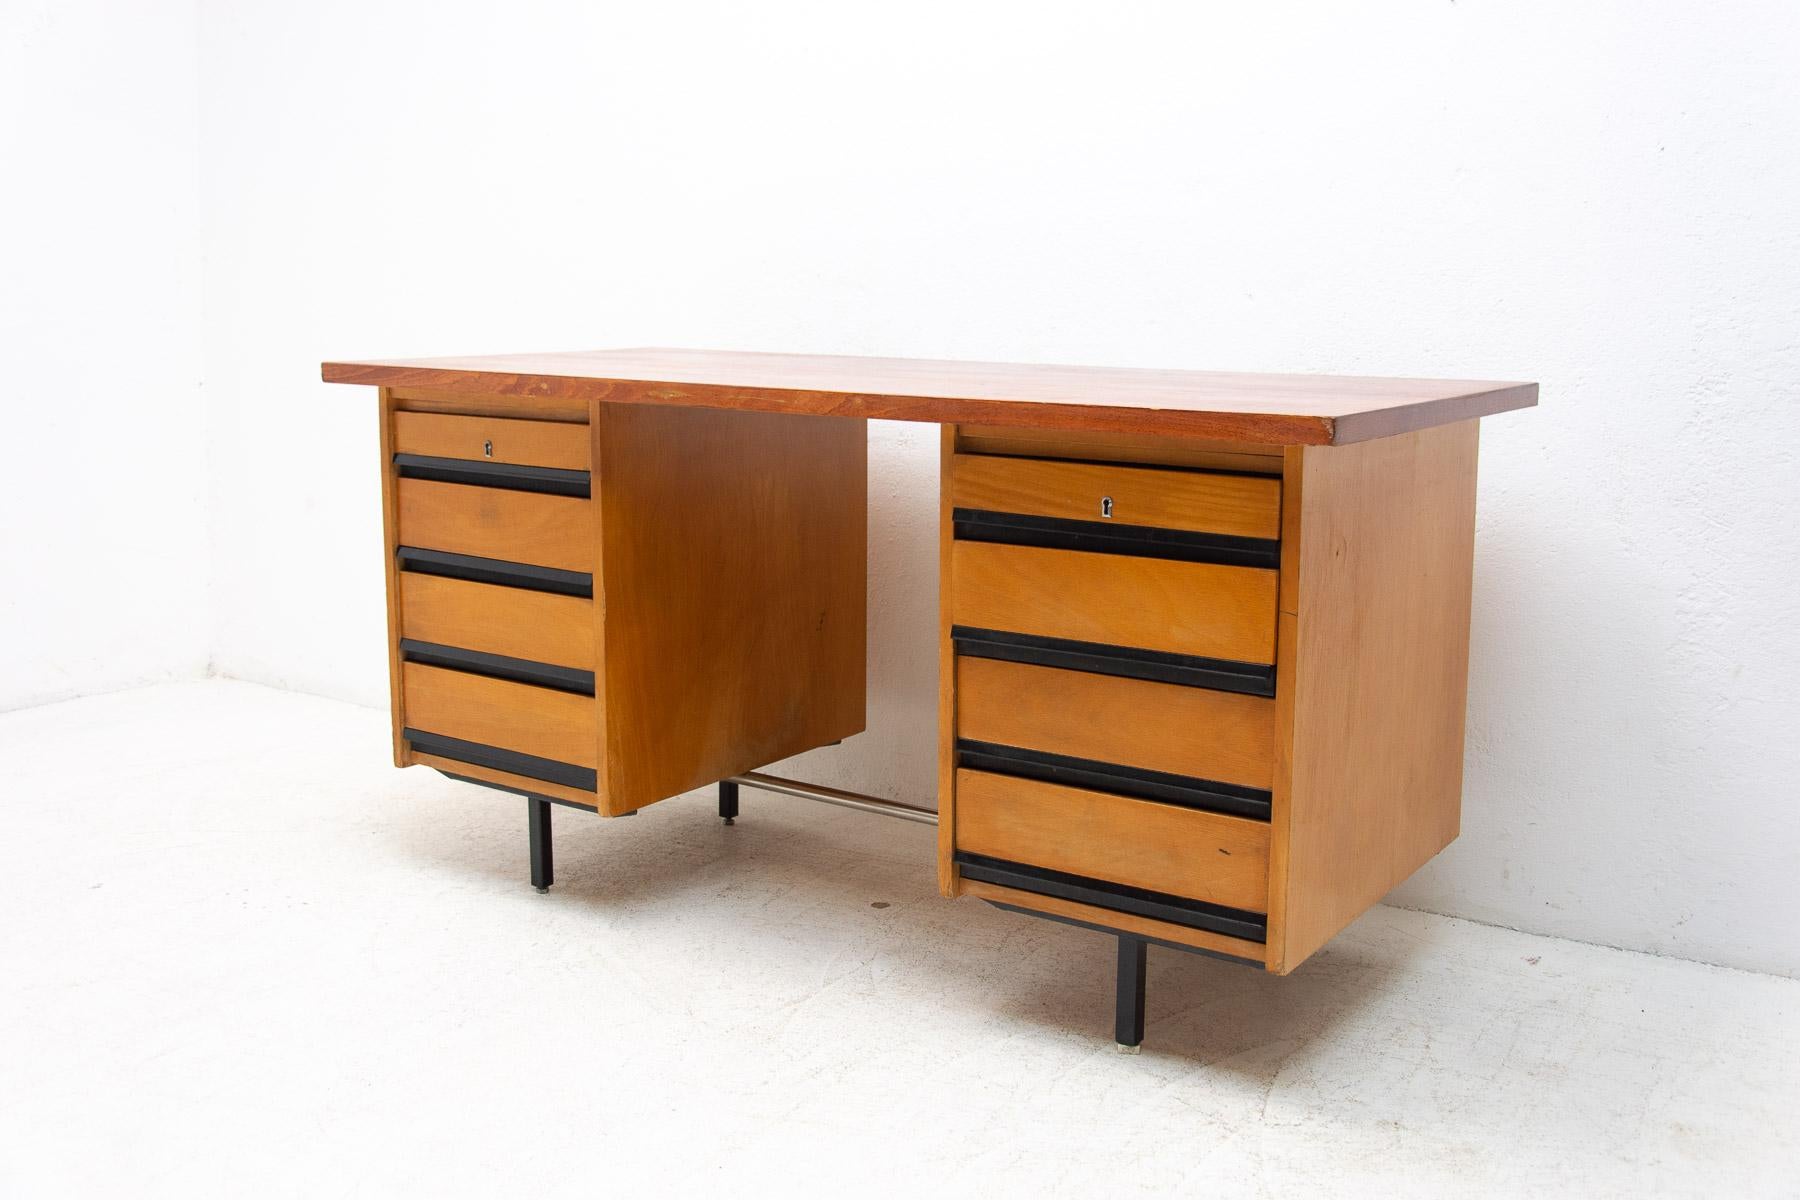 This Vintage writing desk was made in the former Czechoslovakia in the 1970´s.

It's made of beech wood with iron legs. Plastic drawers.

Very simple design. In good vintage condition, showing signs of age and using( few small scratches